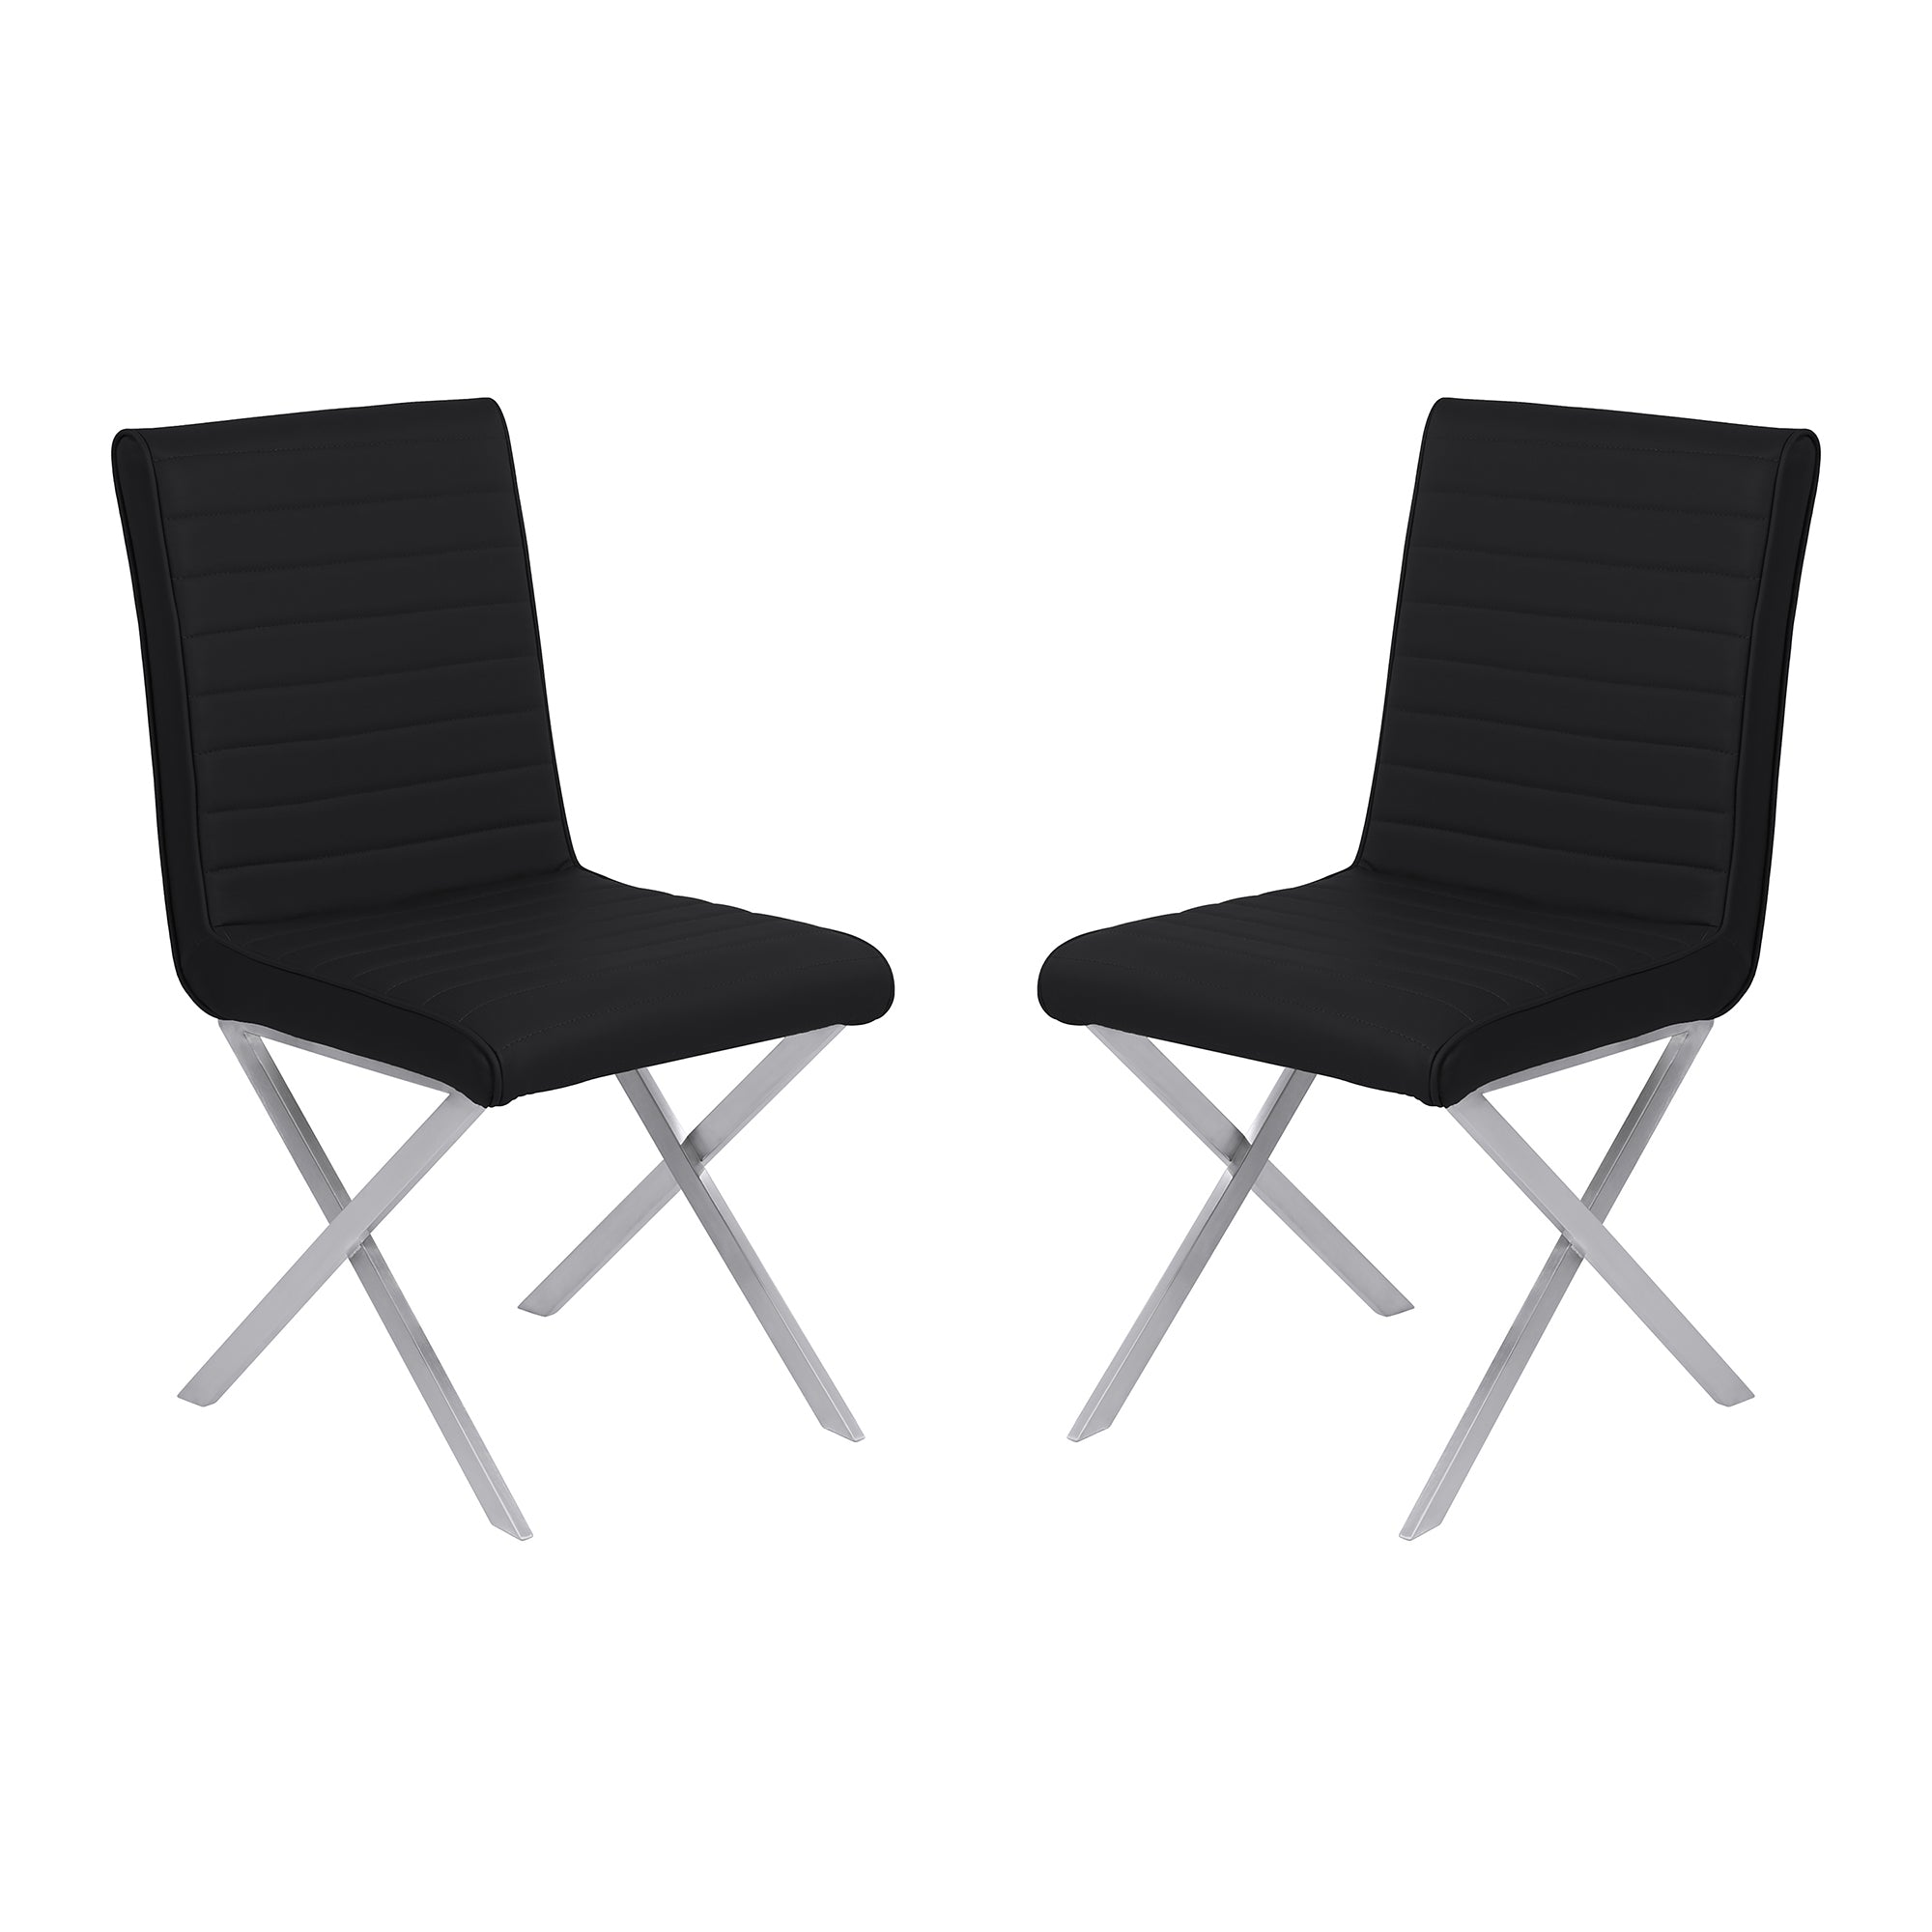 Armen Living Lctesiblbs Tempe Contemporary Dining Chair In Black Faux Leather With Brushed Stainless Steel Finish - Set Of 2